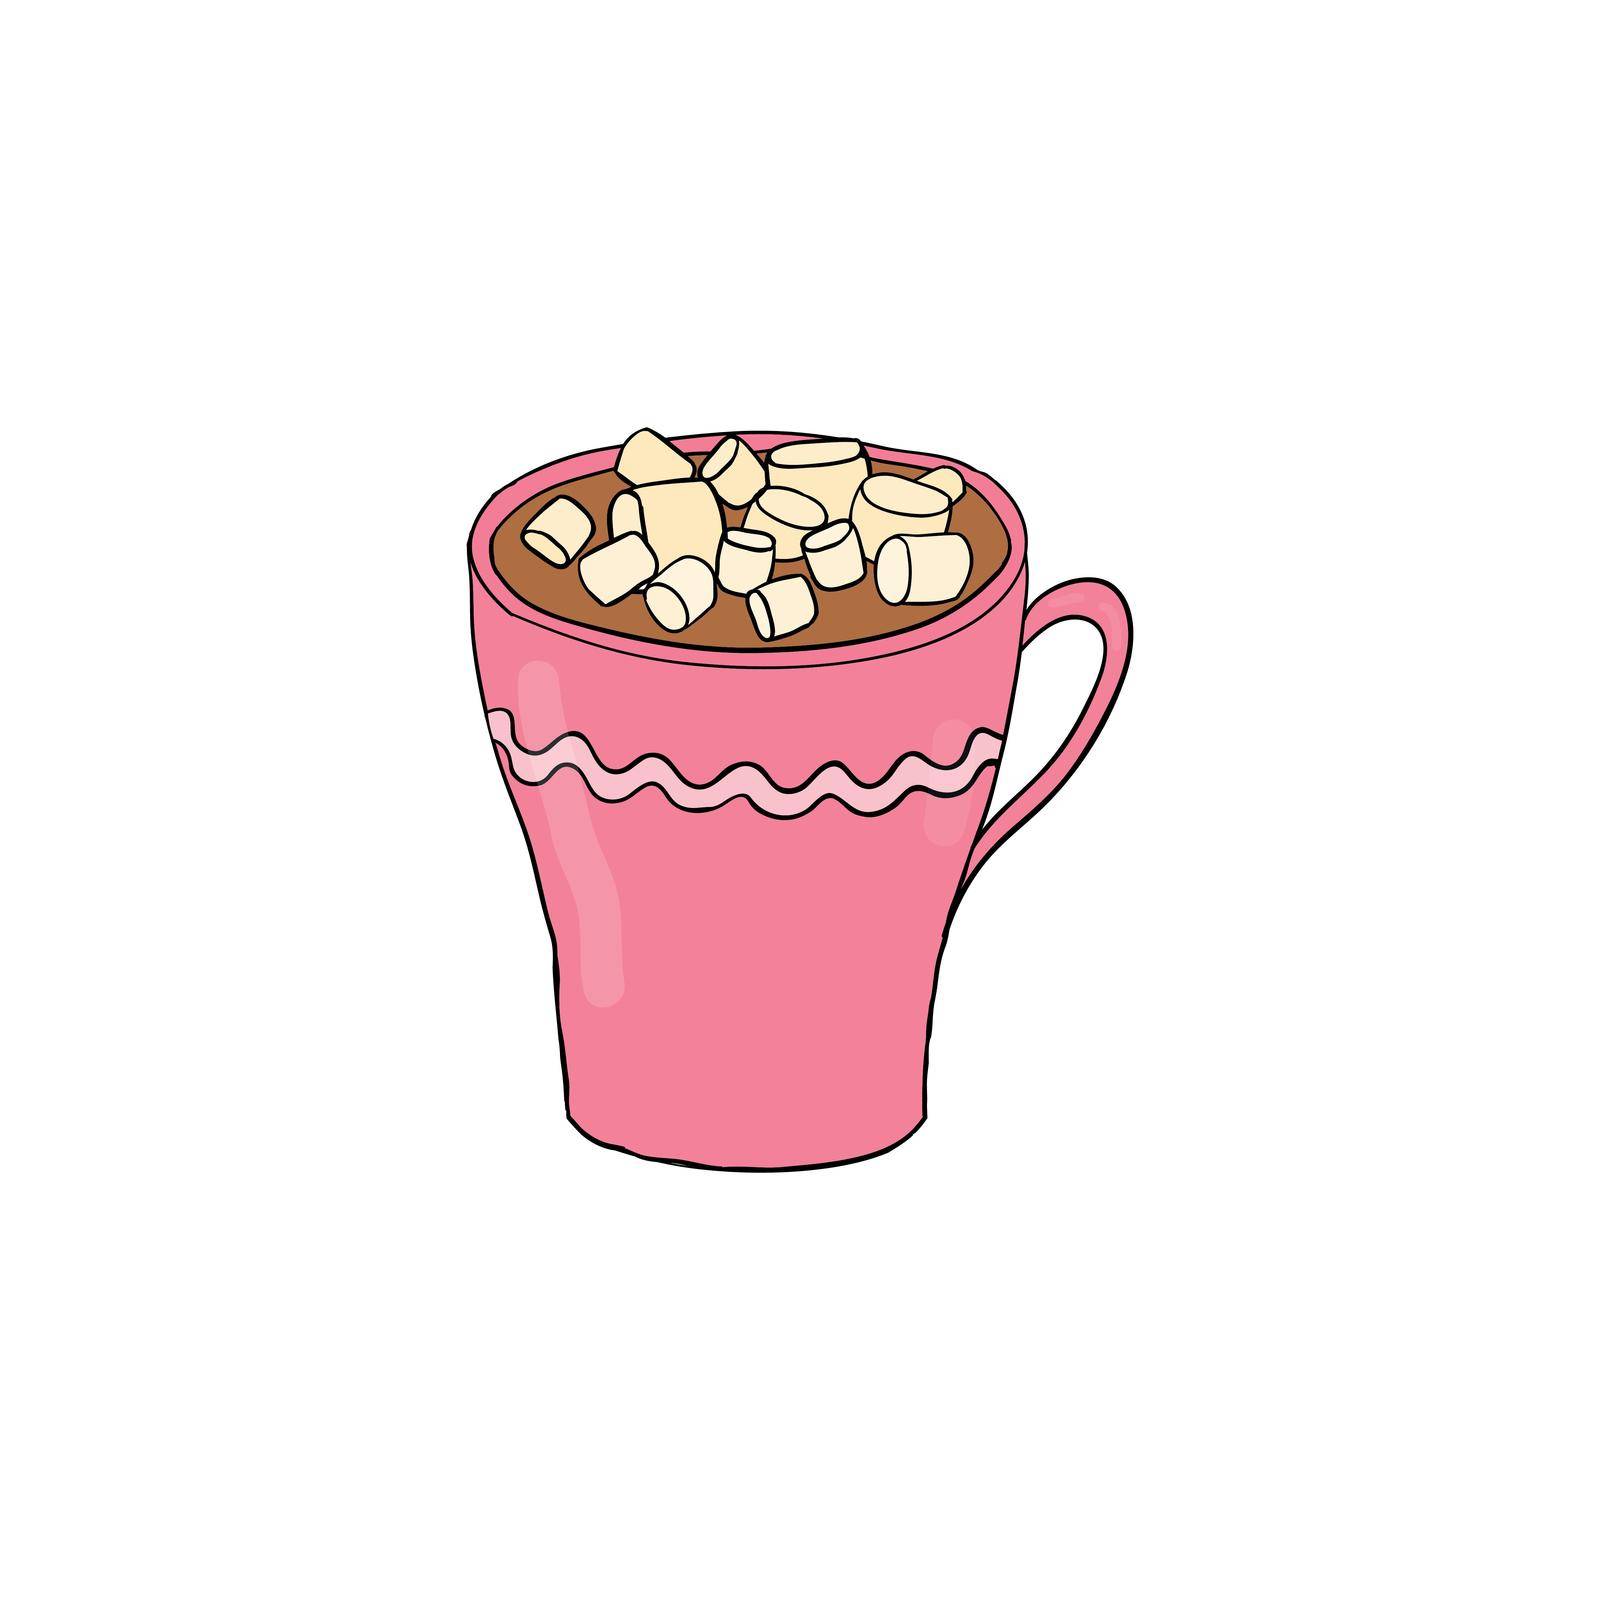 Hand drawn cocoa with marshmallow. by Minur